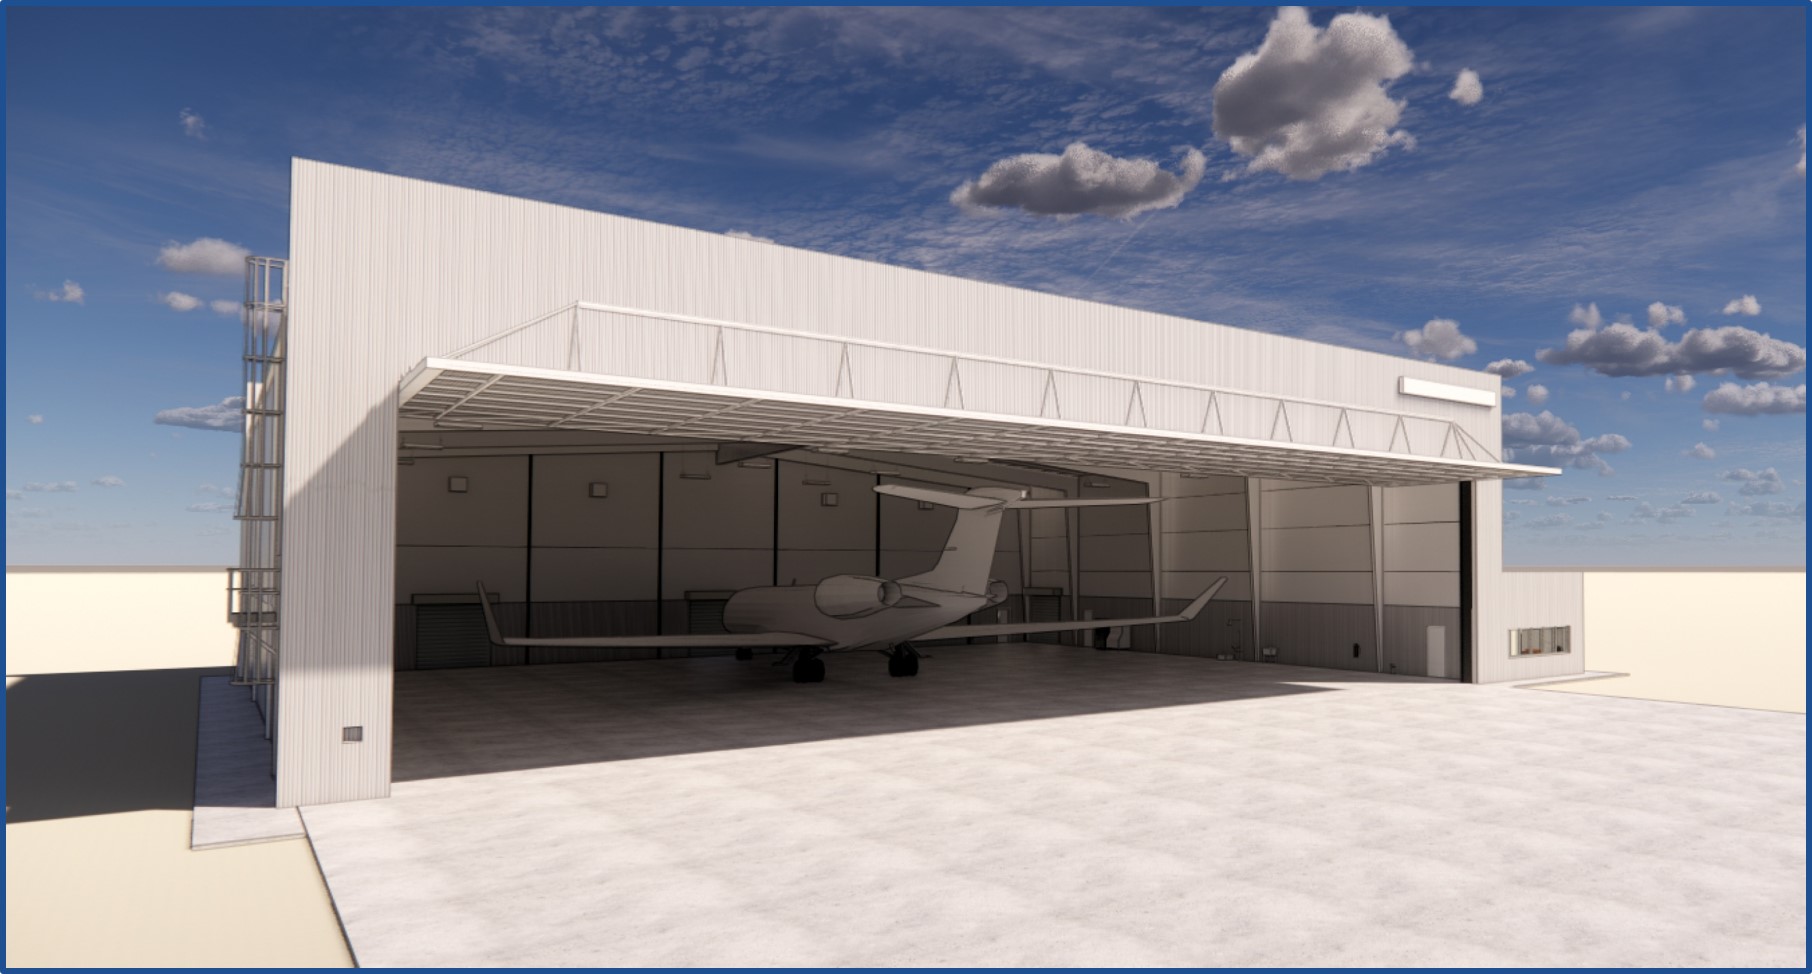 Airport Hangar with airplane inside